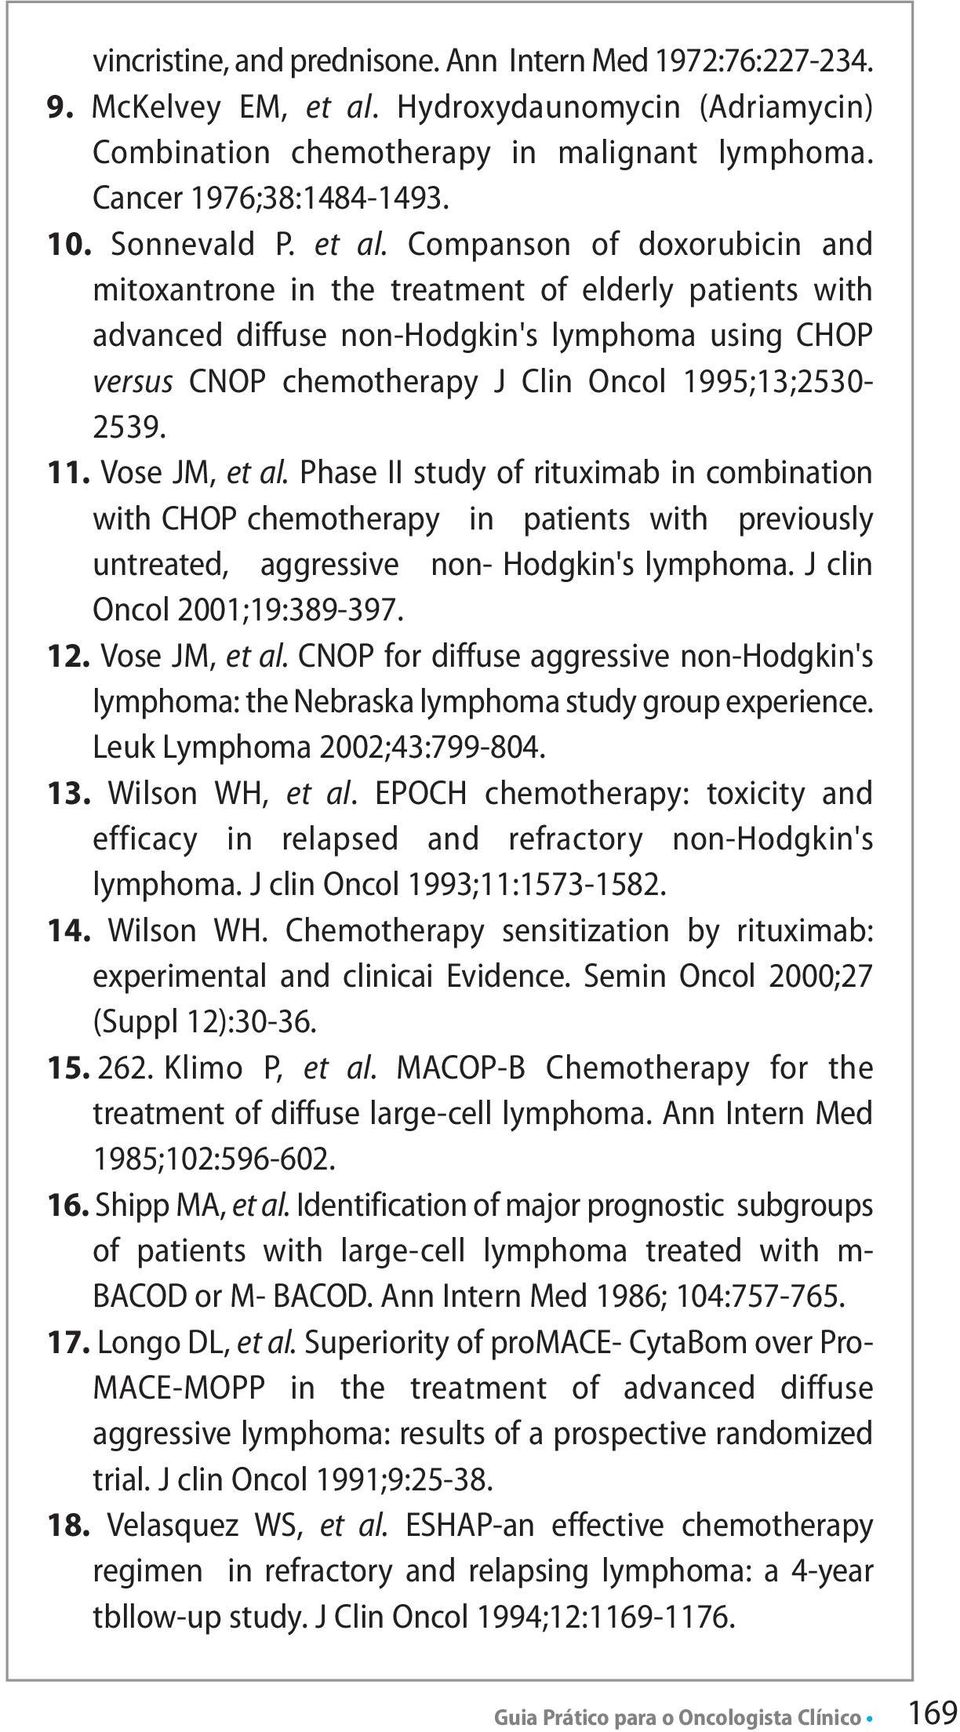 Companson of doxorubicin and mitoxantrone in the treatment of elderly patients with advanced diffuse non-hodgkin's lymphoma using CHOP versus CNOP chemotherapy J Clin Oncol 1995;13;2530-2539. 11.